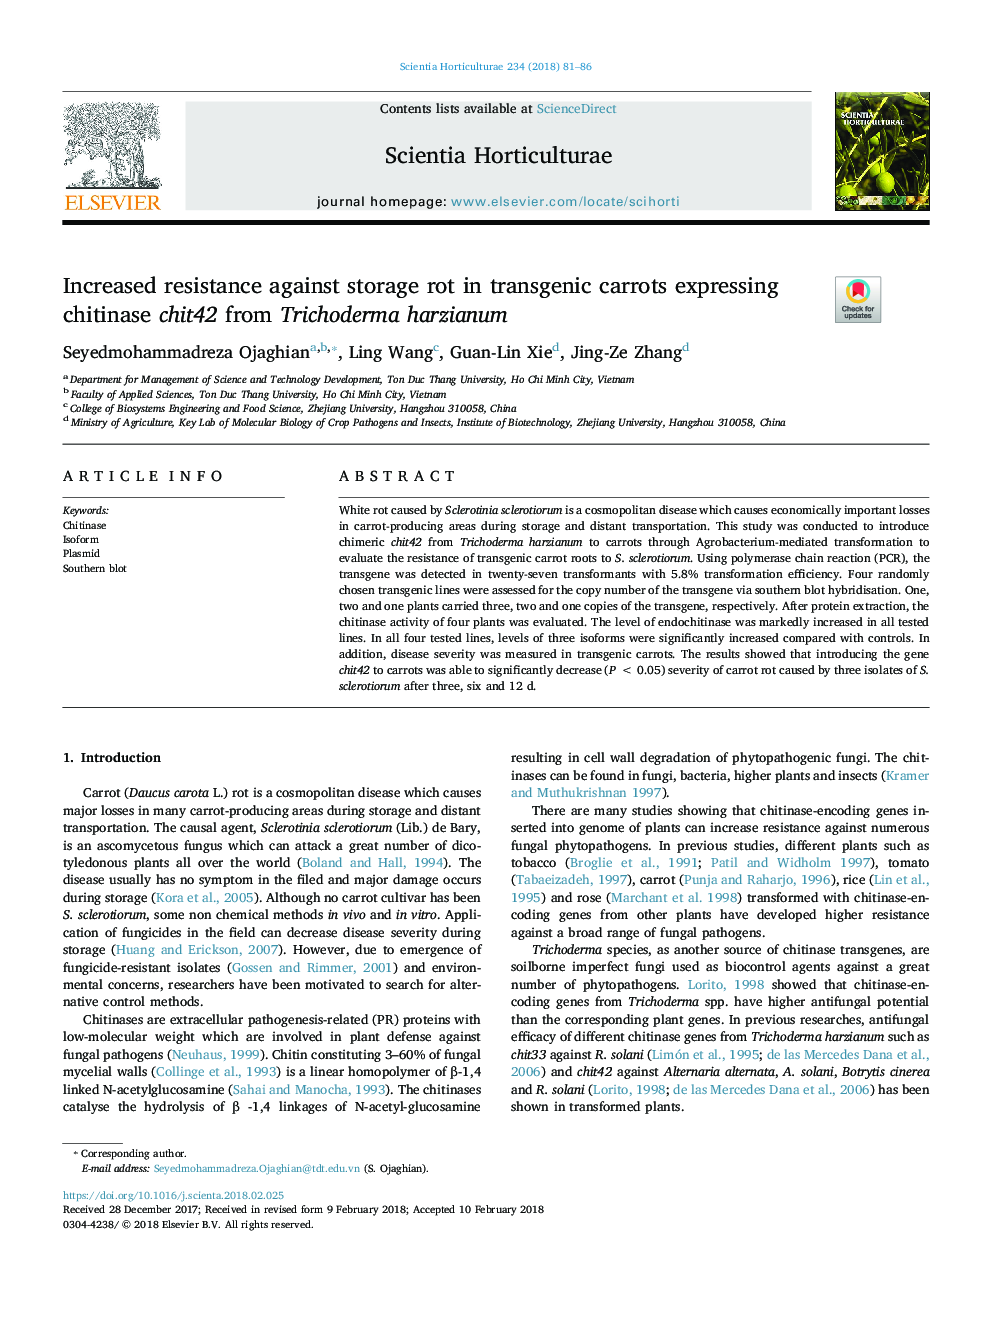 Increased resistance against storage rot in transgenic carrots expressing chitinase chit42 from Trichoderma harzianum